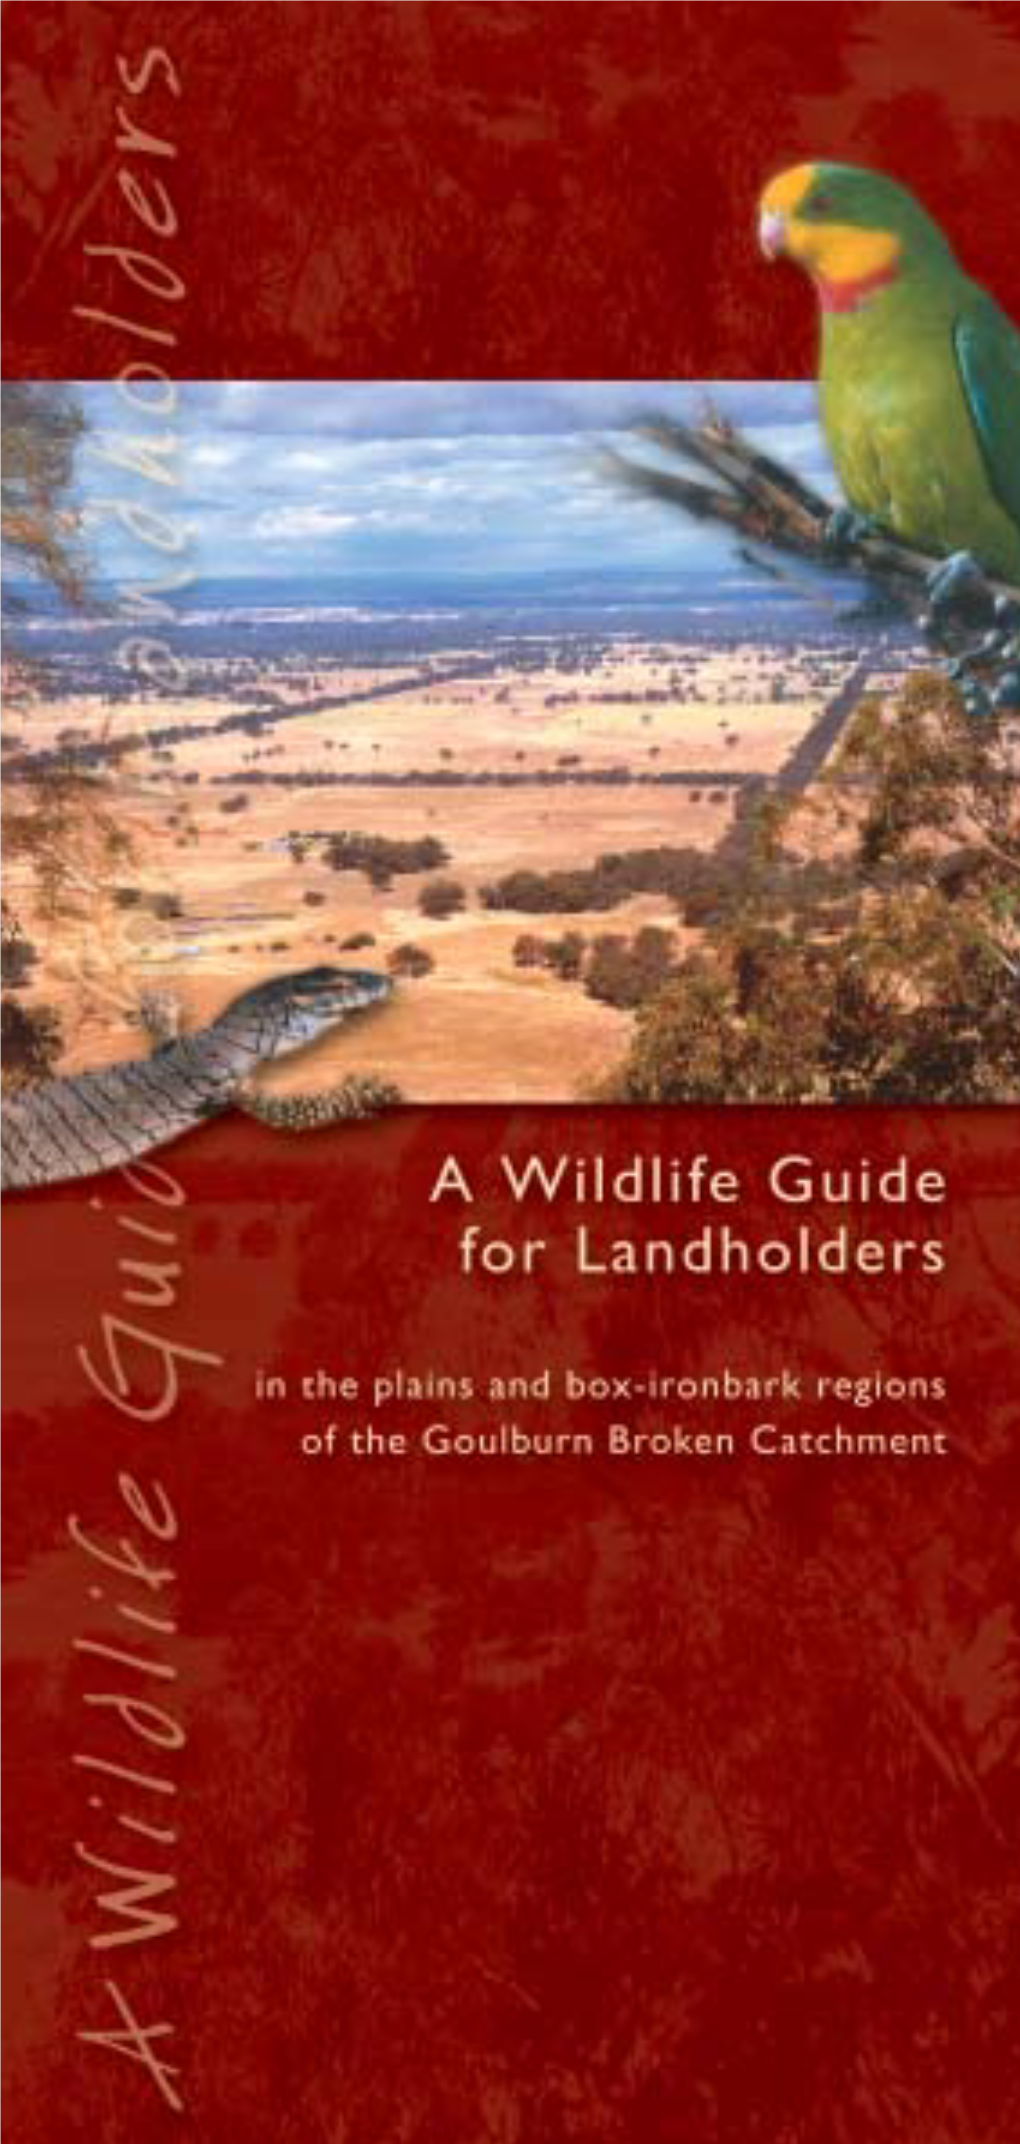 Wildlife Guide for Landholders in the Plains and Box-Ironbark Regions of the Goulburn Broken Catchment GBCMA, Shepparton